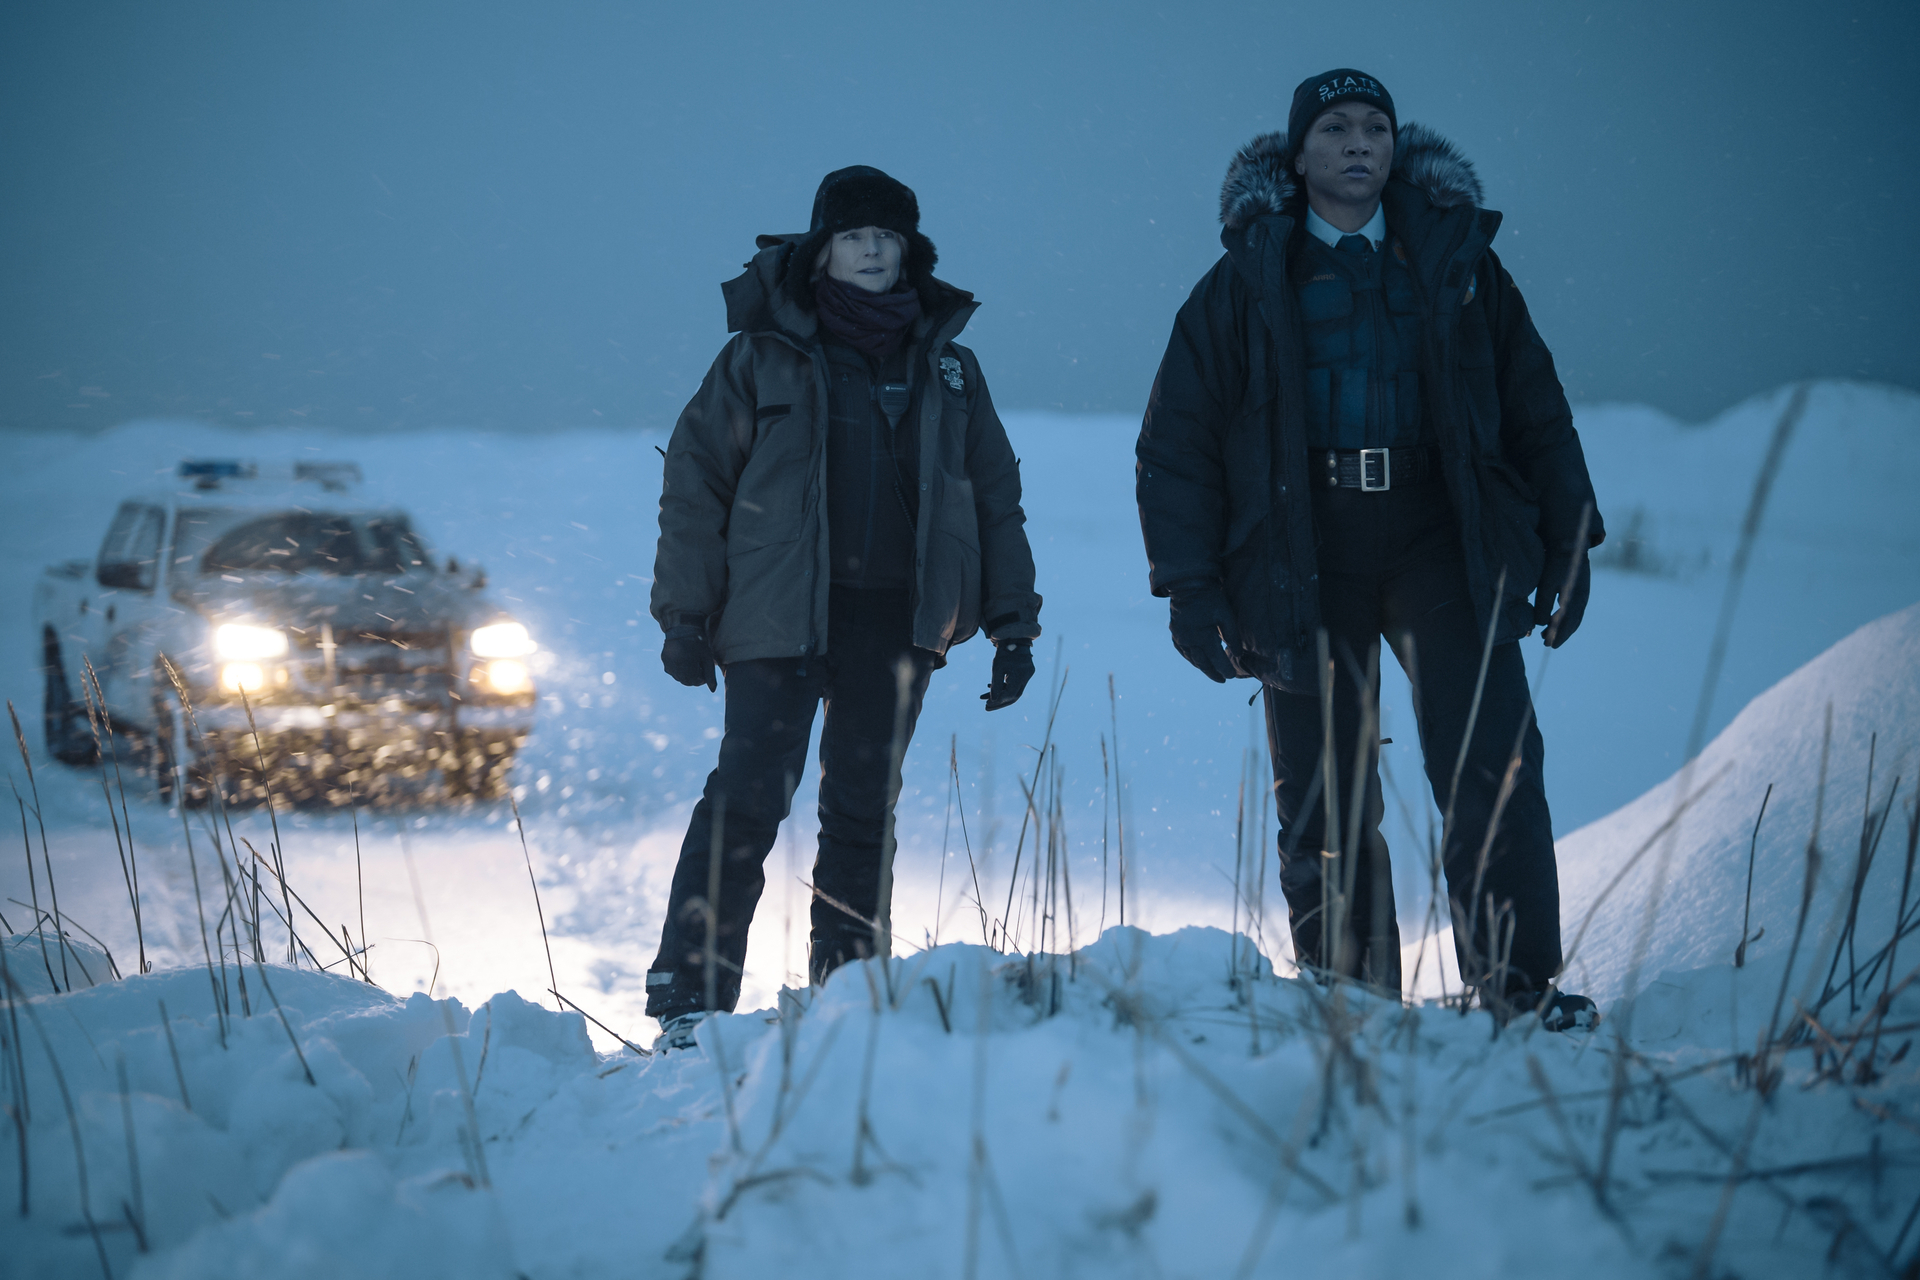 Two characters in heavy winter gear stand in the snow with a vehicle behind them, in a scene from a TV show or movie